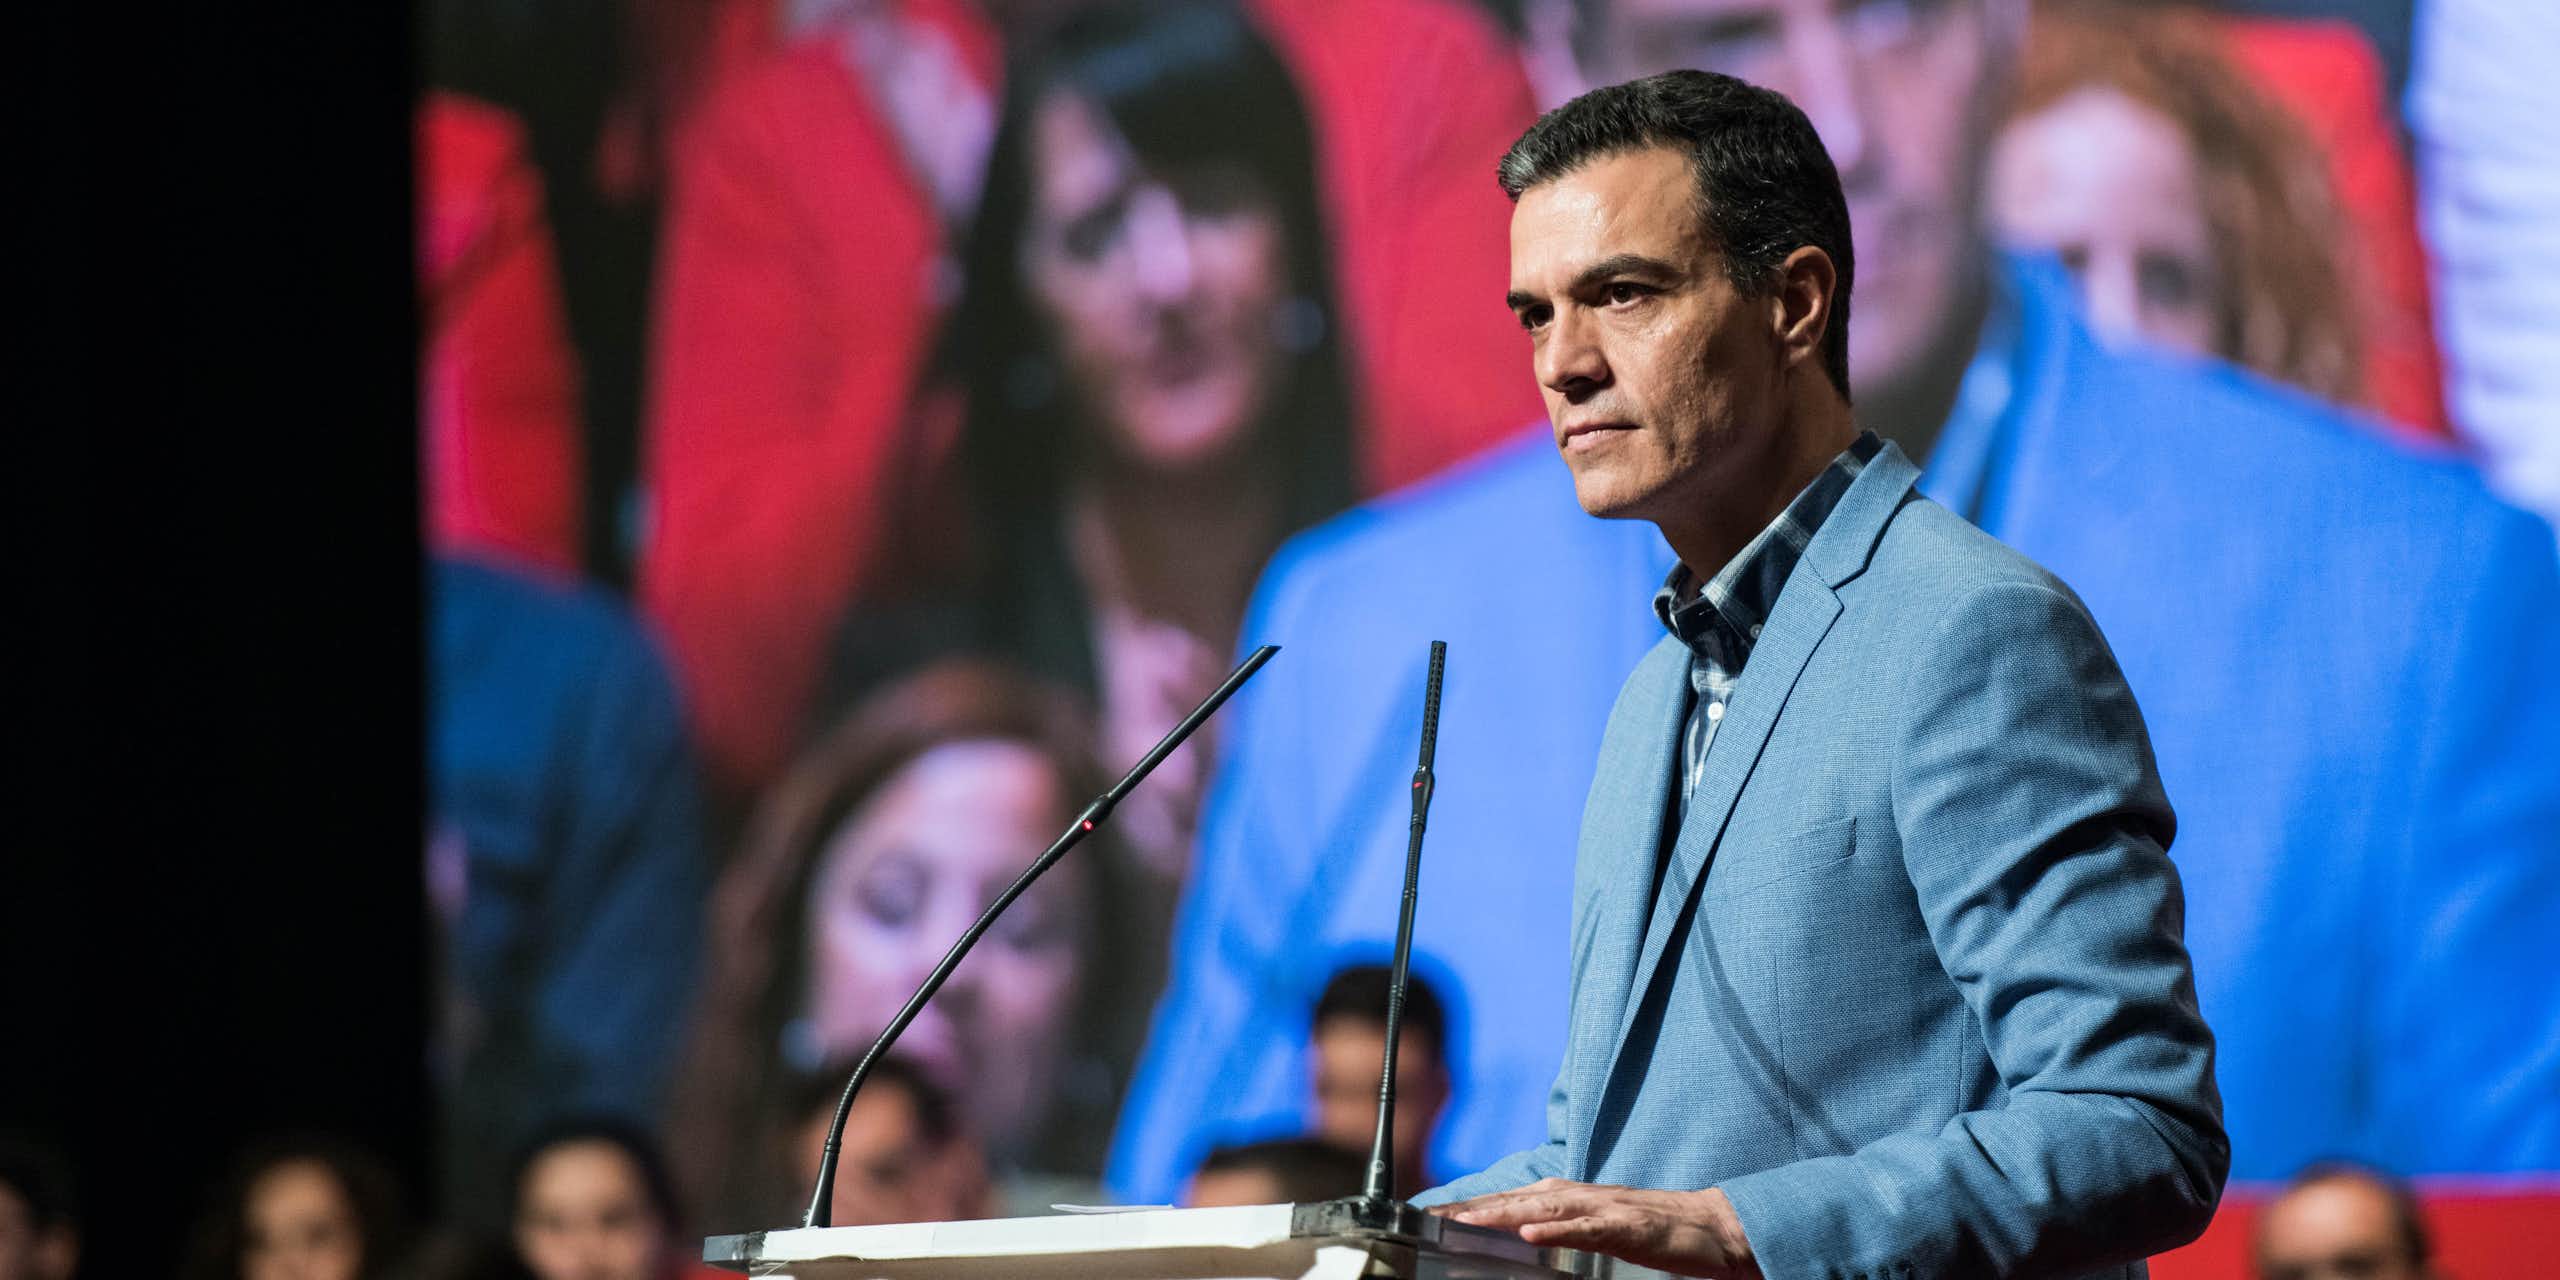 Pedro Sánchez’s ‘letter to the citizens’ of Spain assessed by a political communications expert